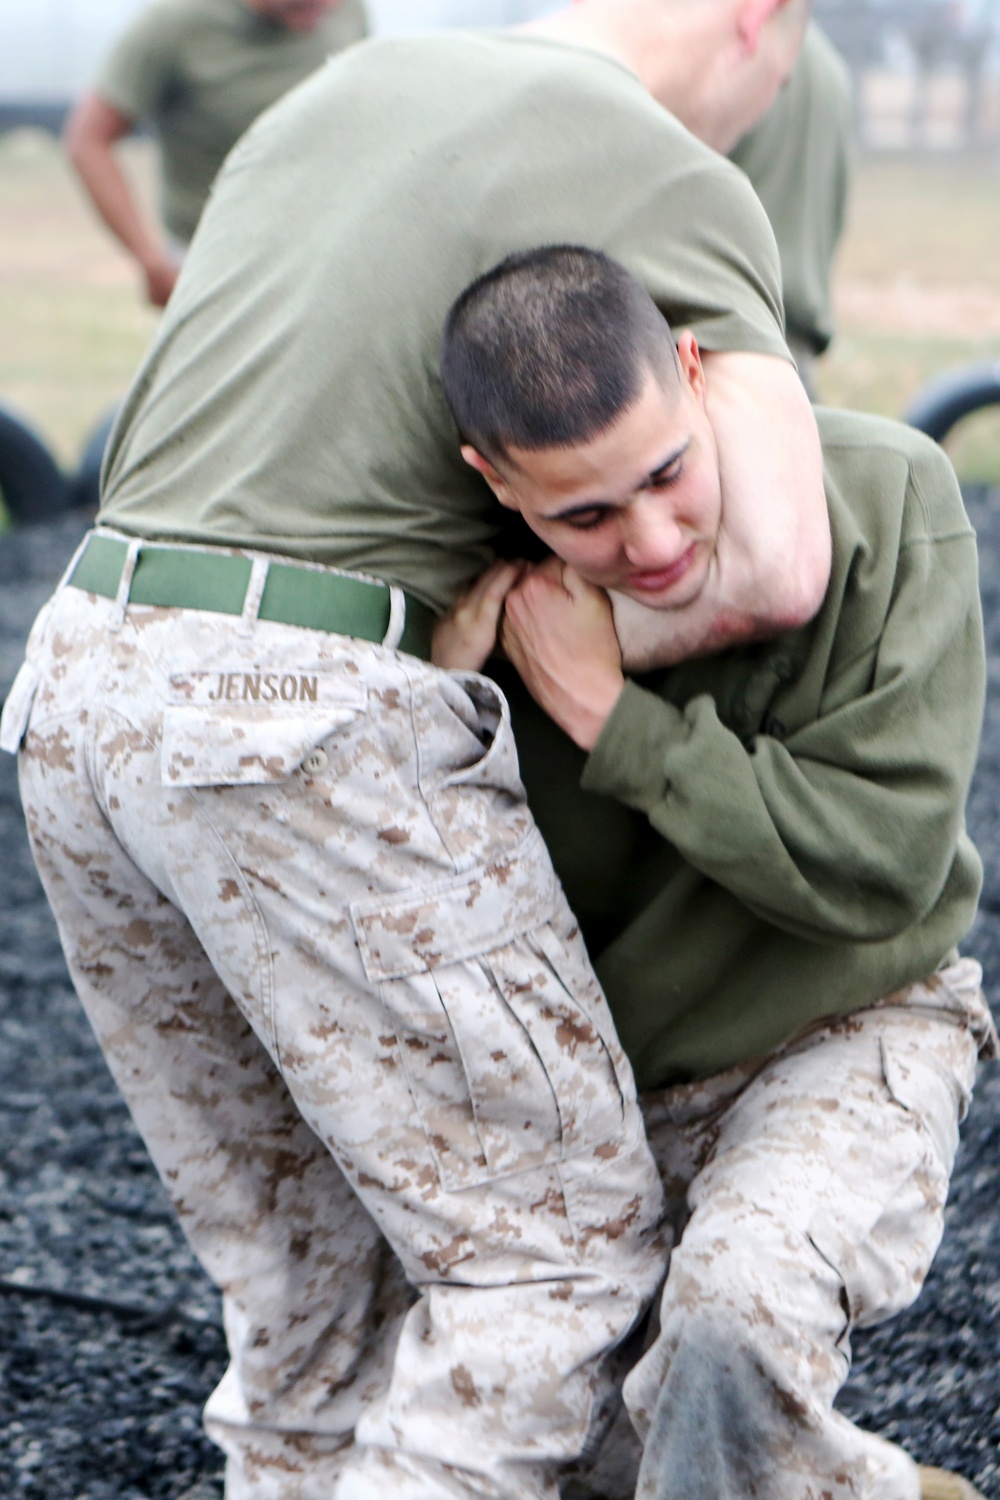 Miramar instructor continues the fight, trains Marines in martial arts